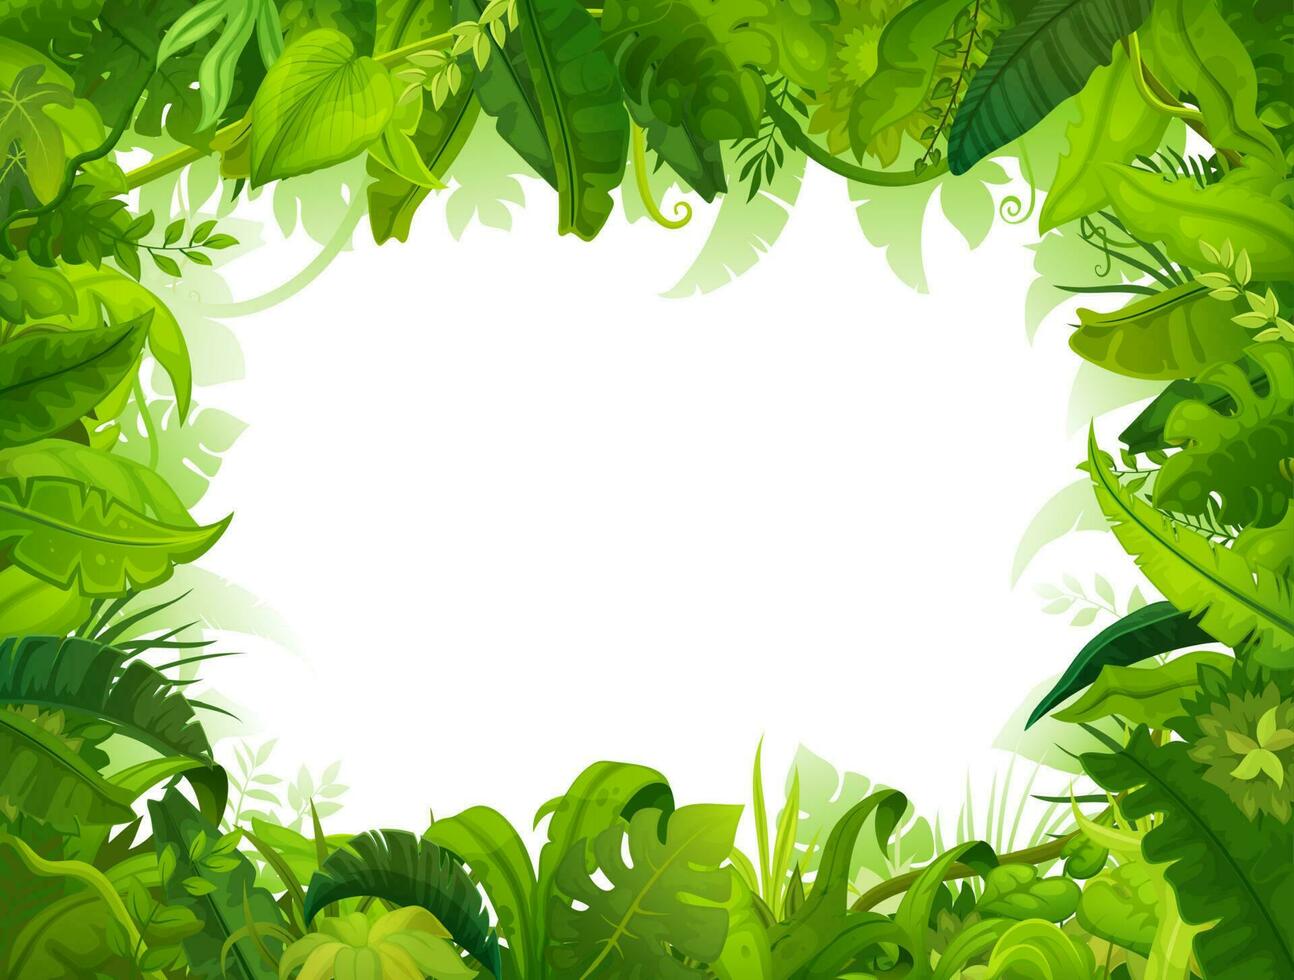 Cartoon jungle frame, green palm leaves background vector